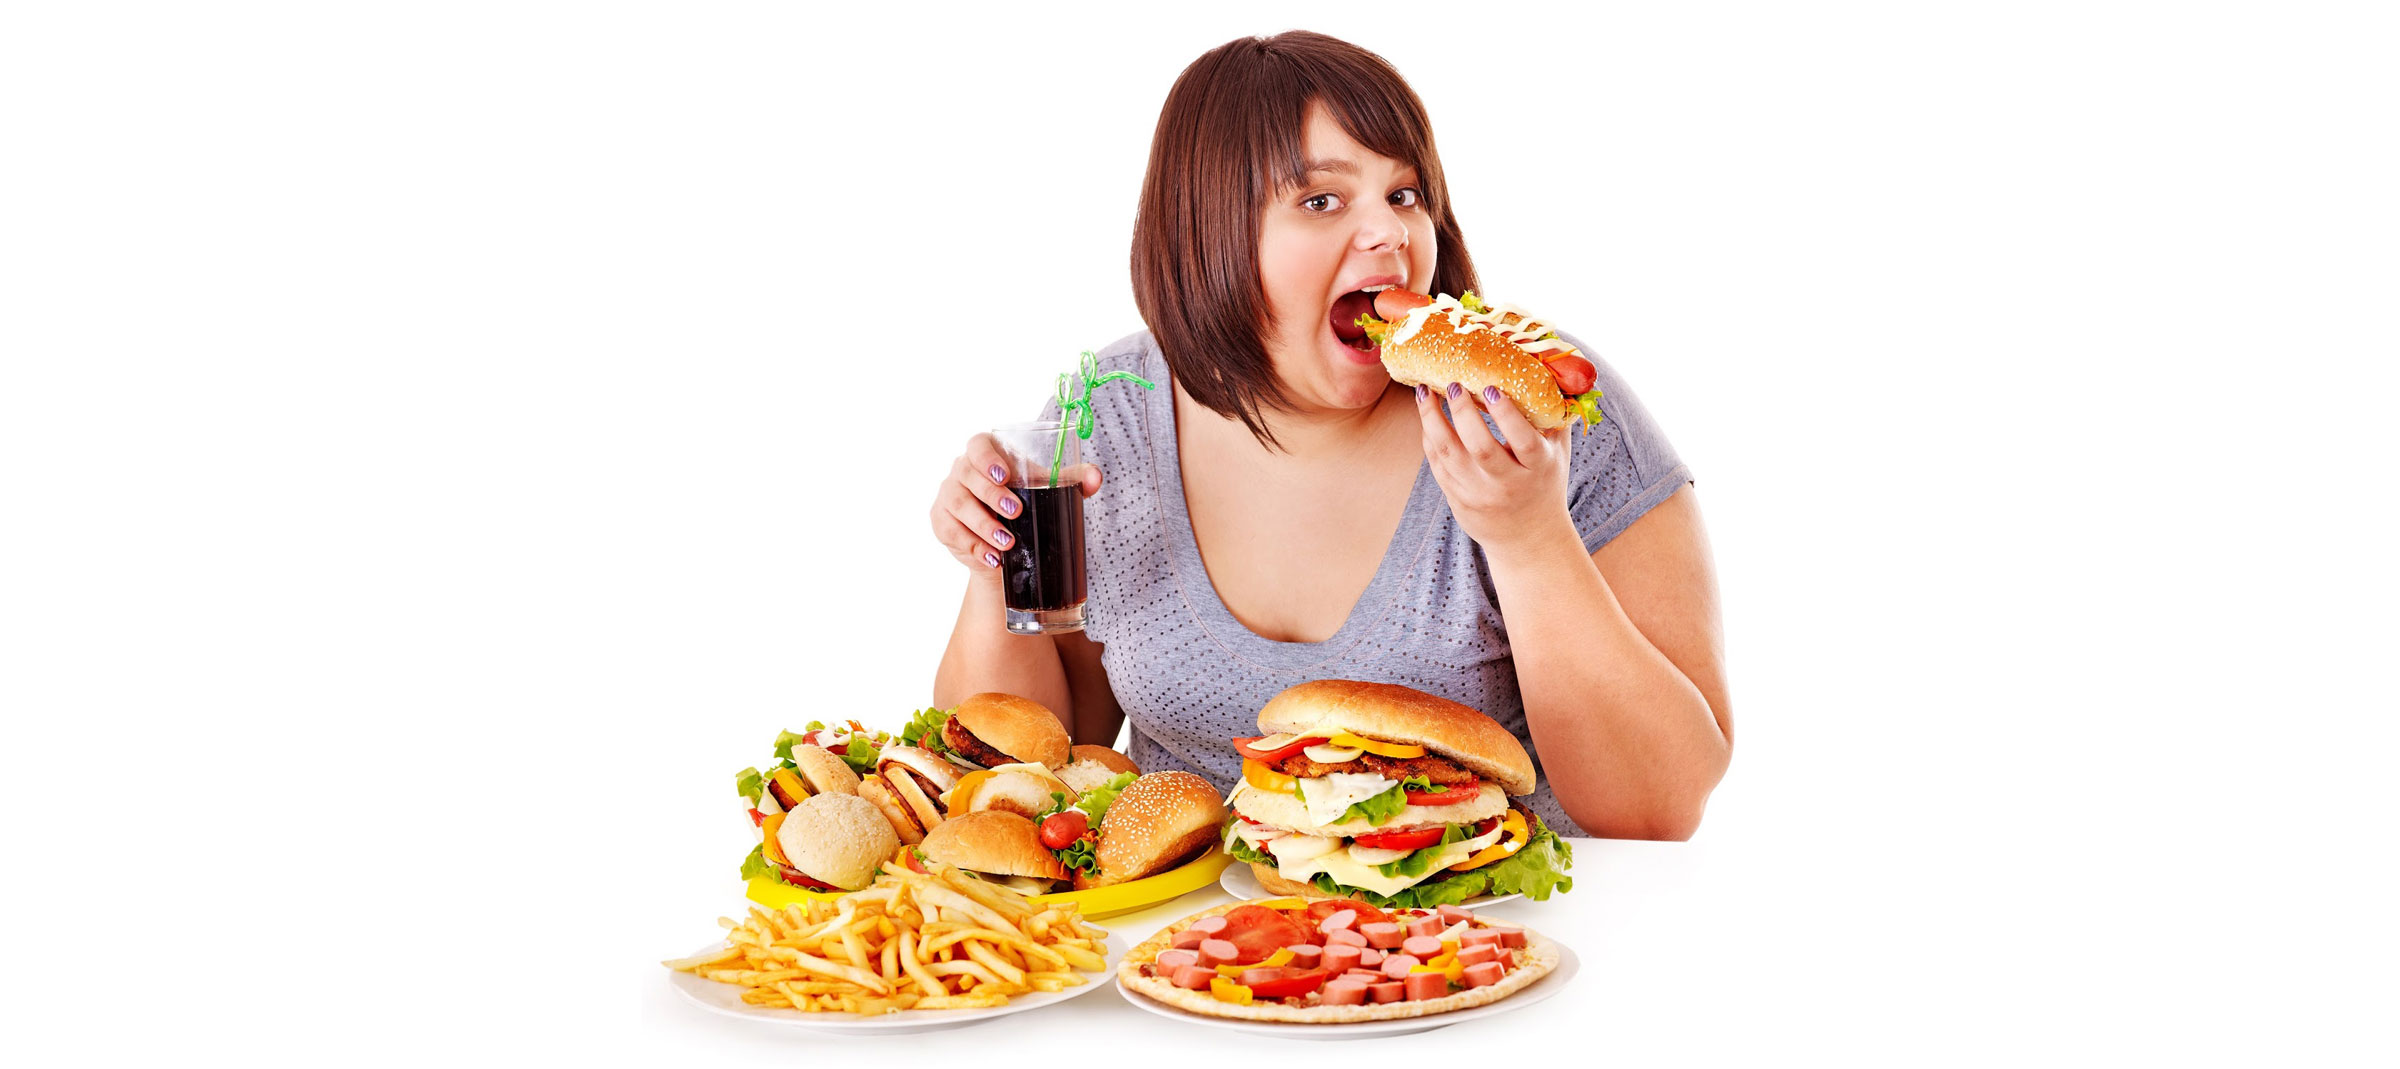 What Happens to Your Body During Cyclic Overeating